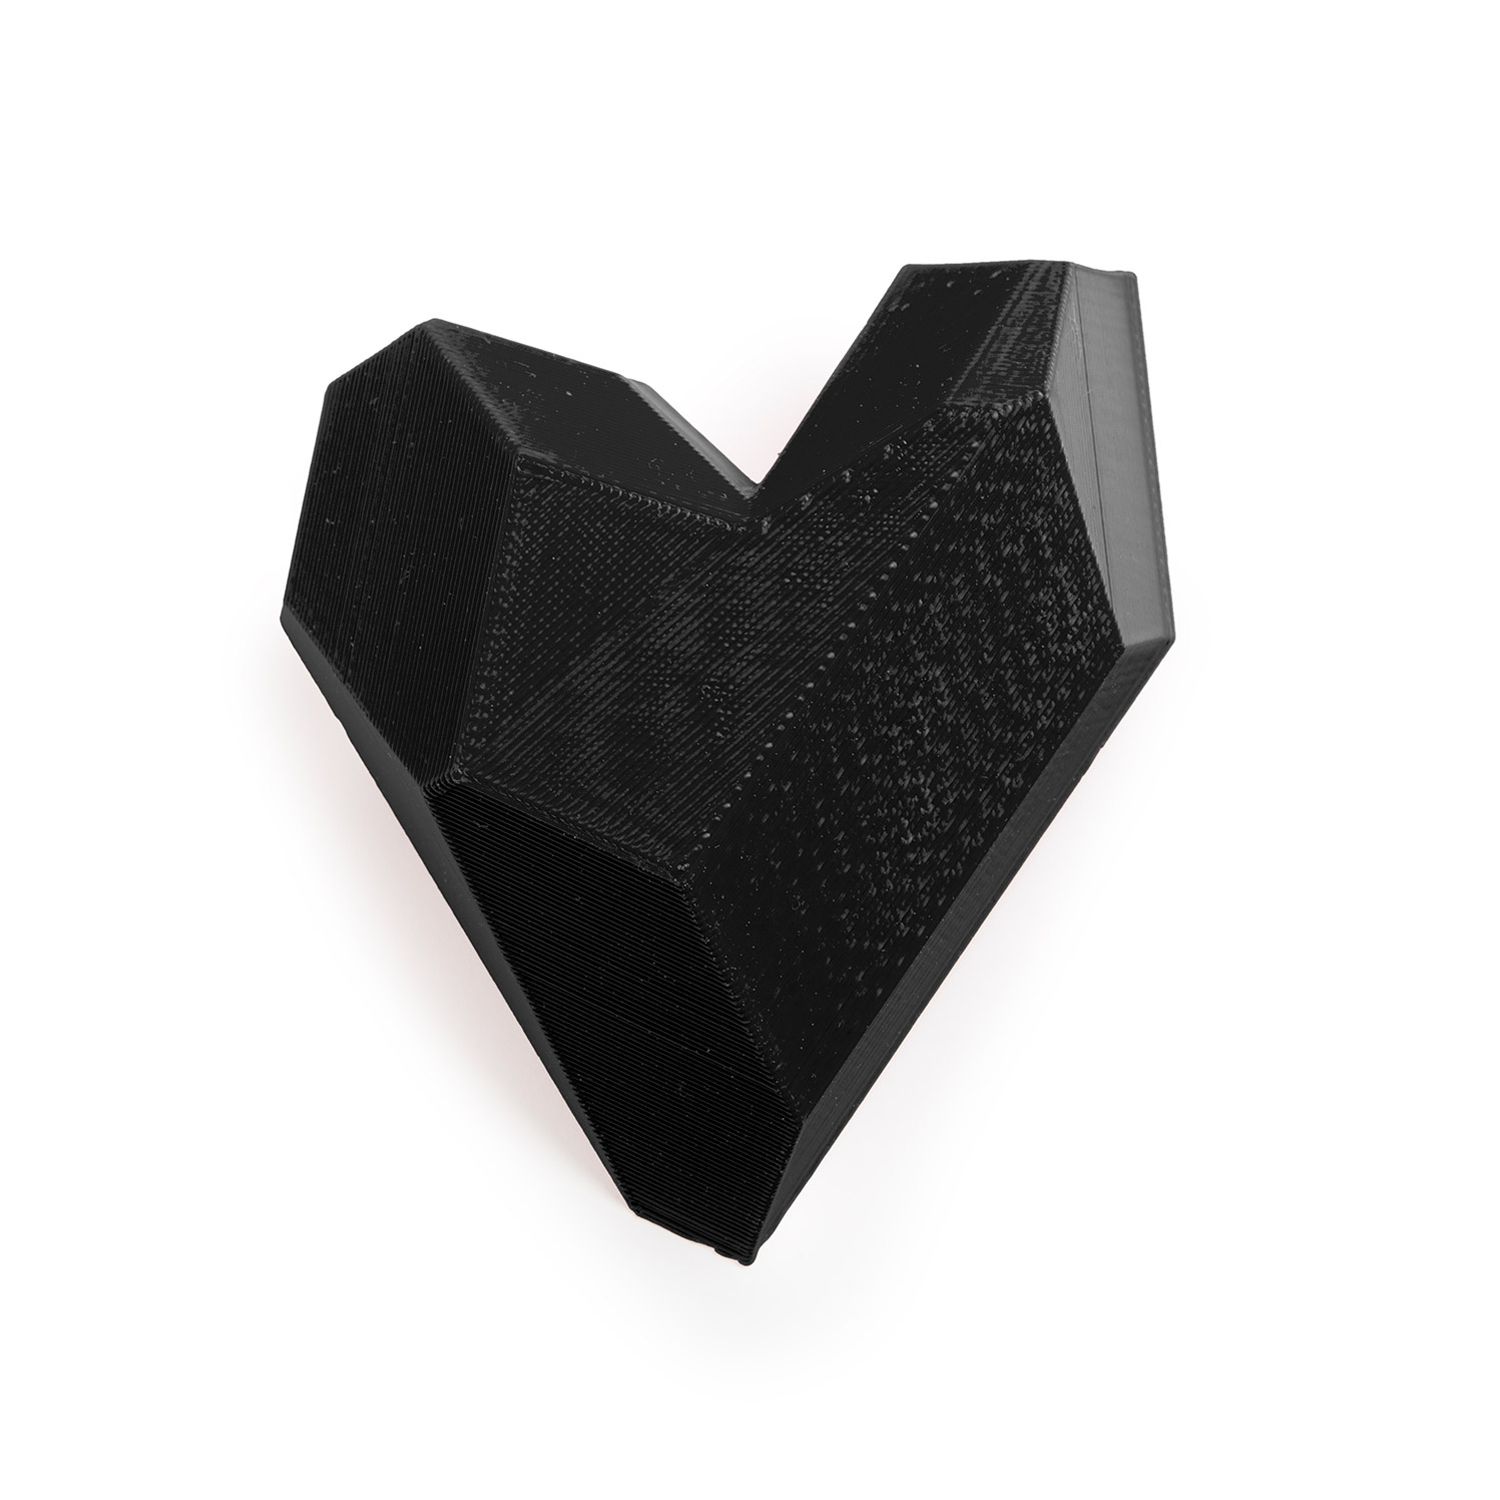 Maison 203: Heart Brooch – Black Product Image 1 of 3